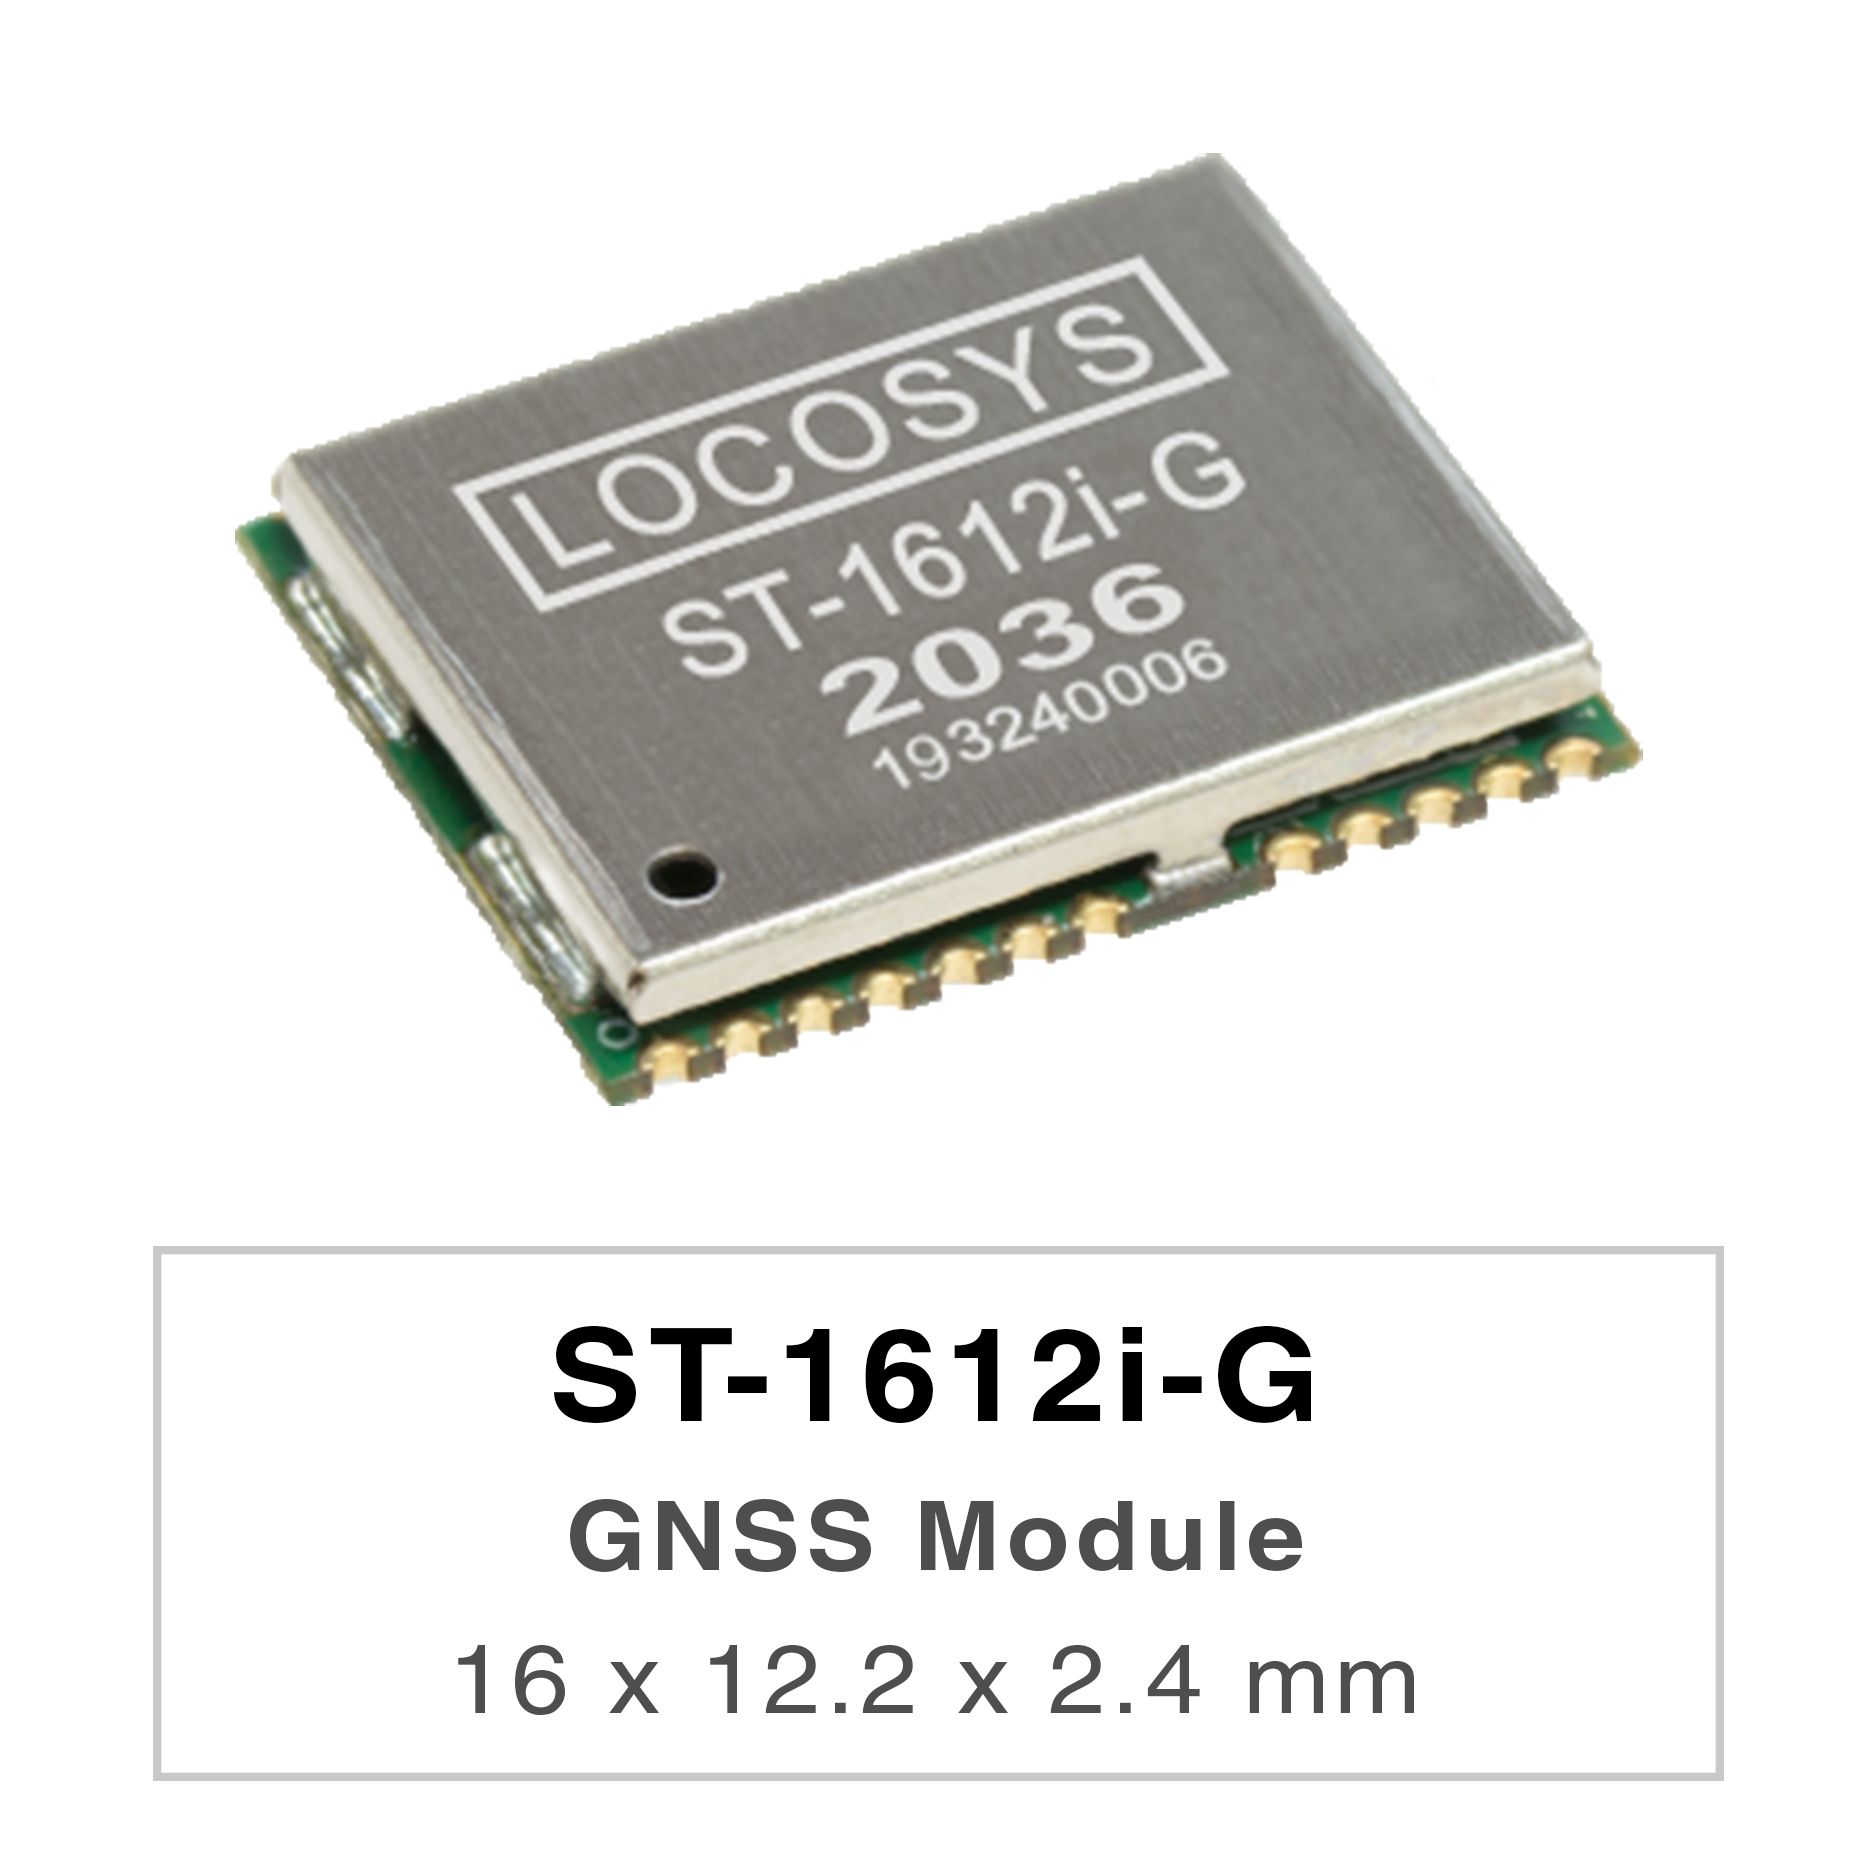 LOCOSYS ST-1612i-G module can simultaneously acquire and track multiple satellite constellations thatinclude GPS, GLONASS, GALILEO and QZSS.